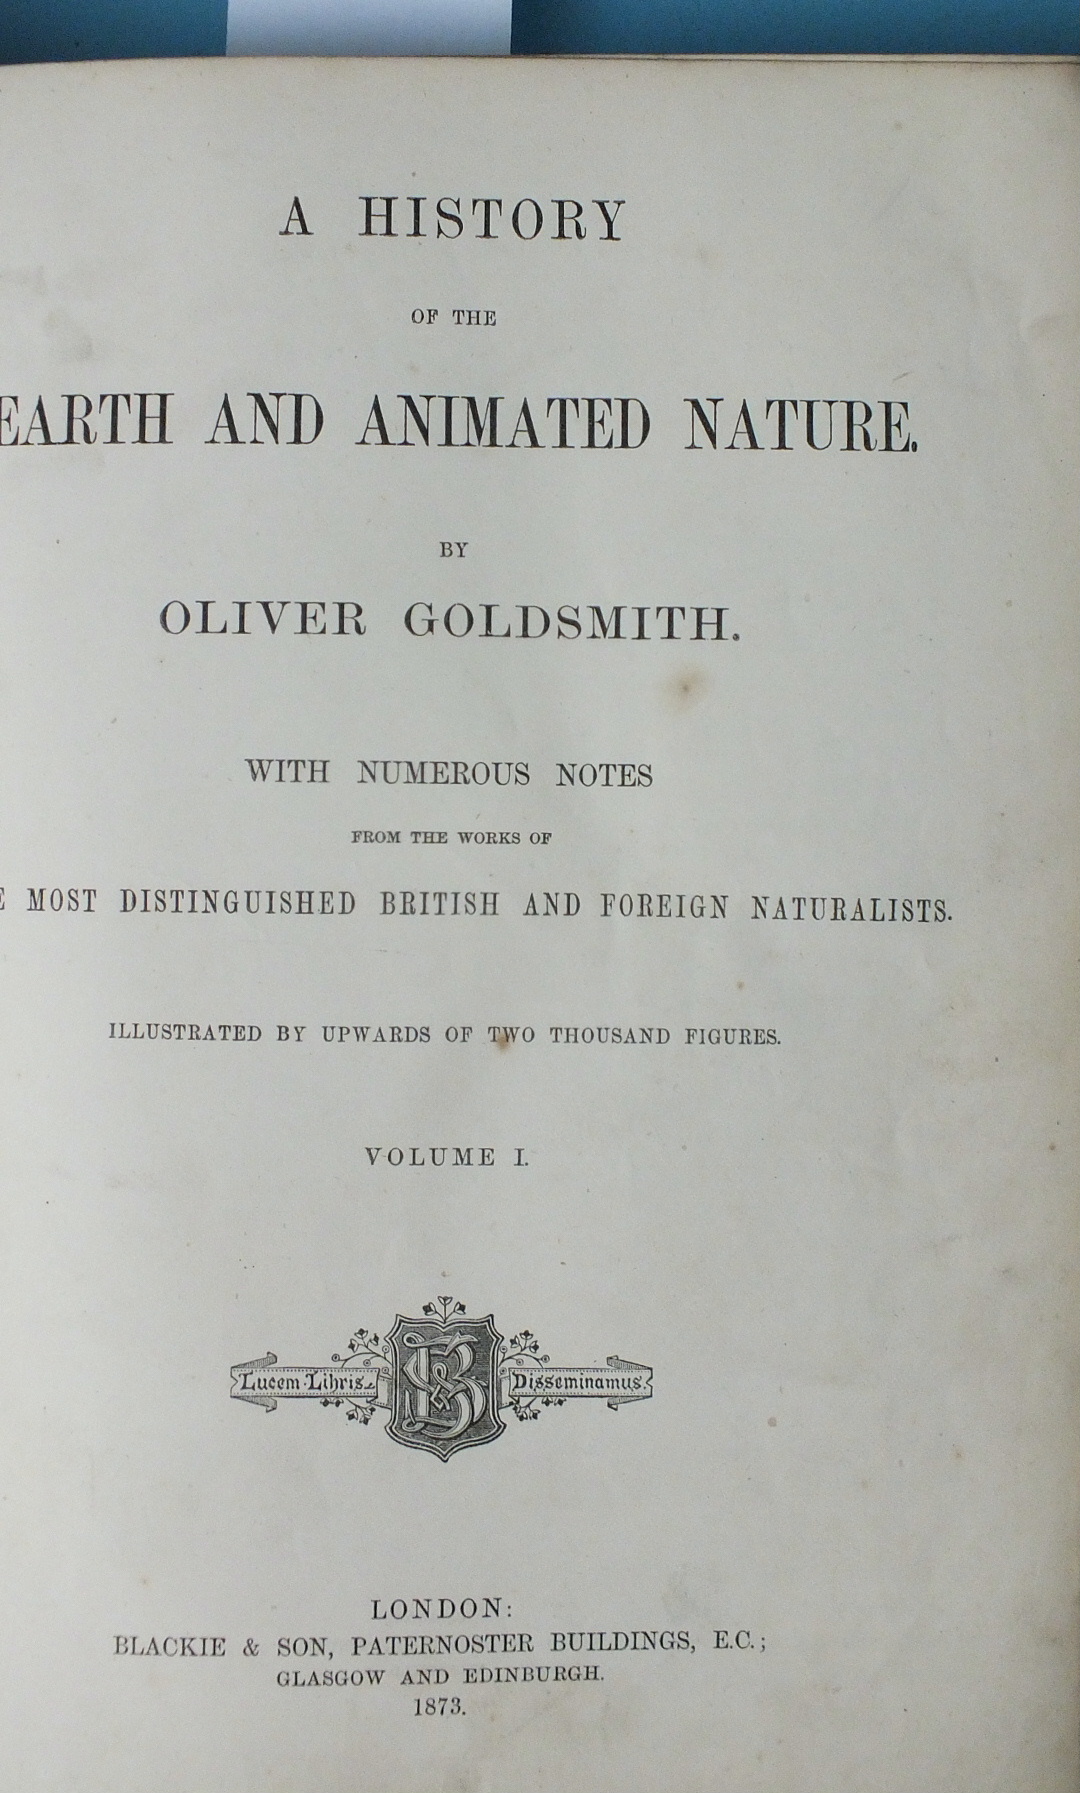 Goldsmith (Oliver), A History of the Earth and Animated Nature, 2 vols, hd col vig tps, plts, some - Image 2 of 3